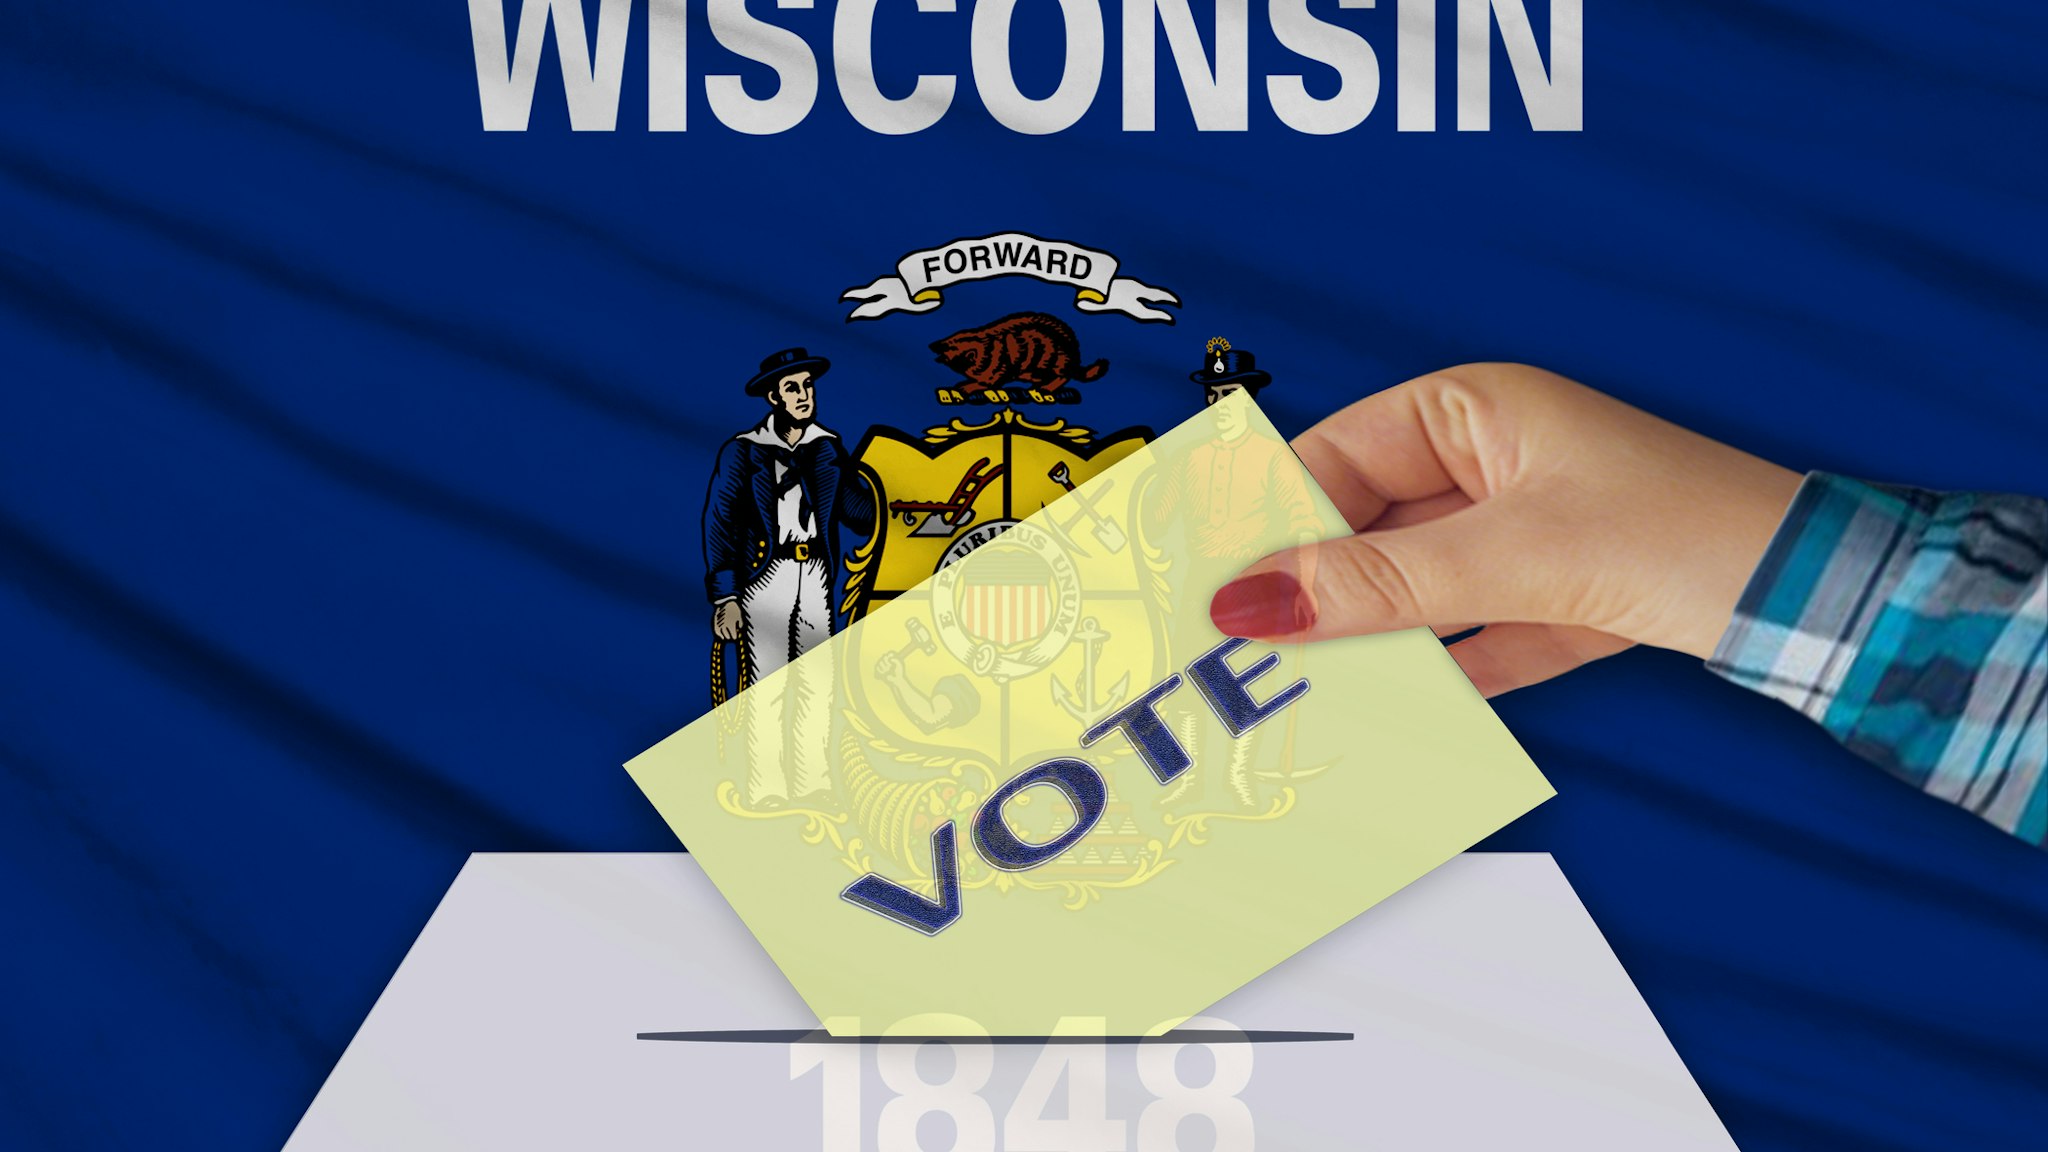 Election Day in the United States of America - WISCONSIN.